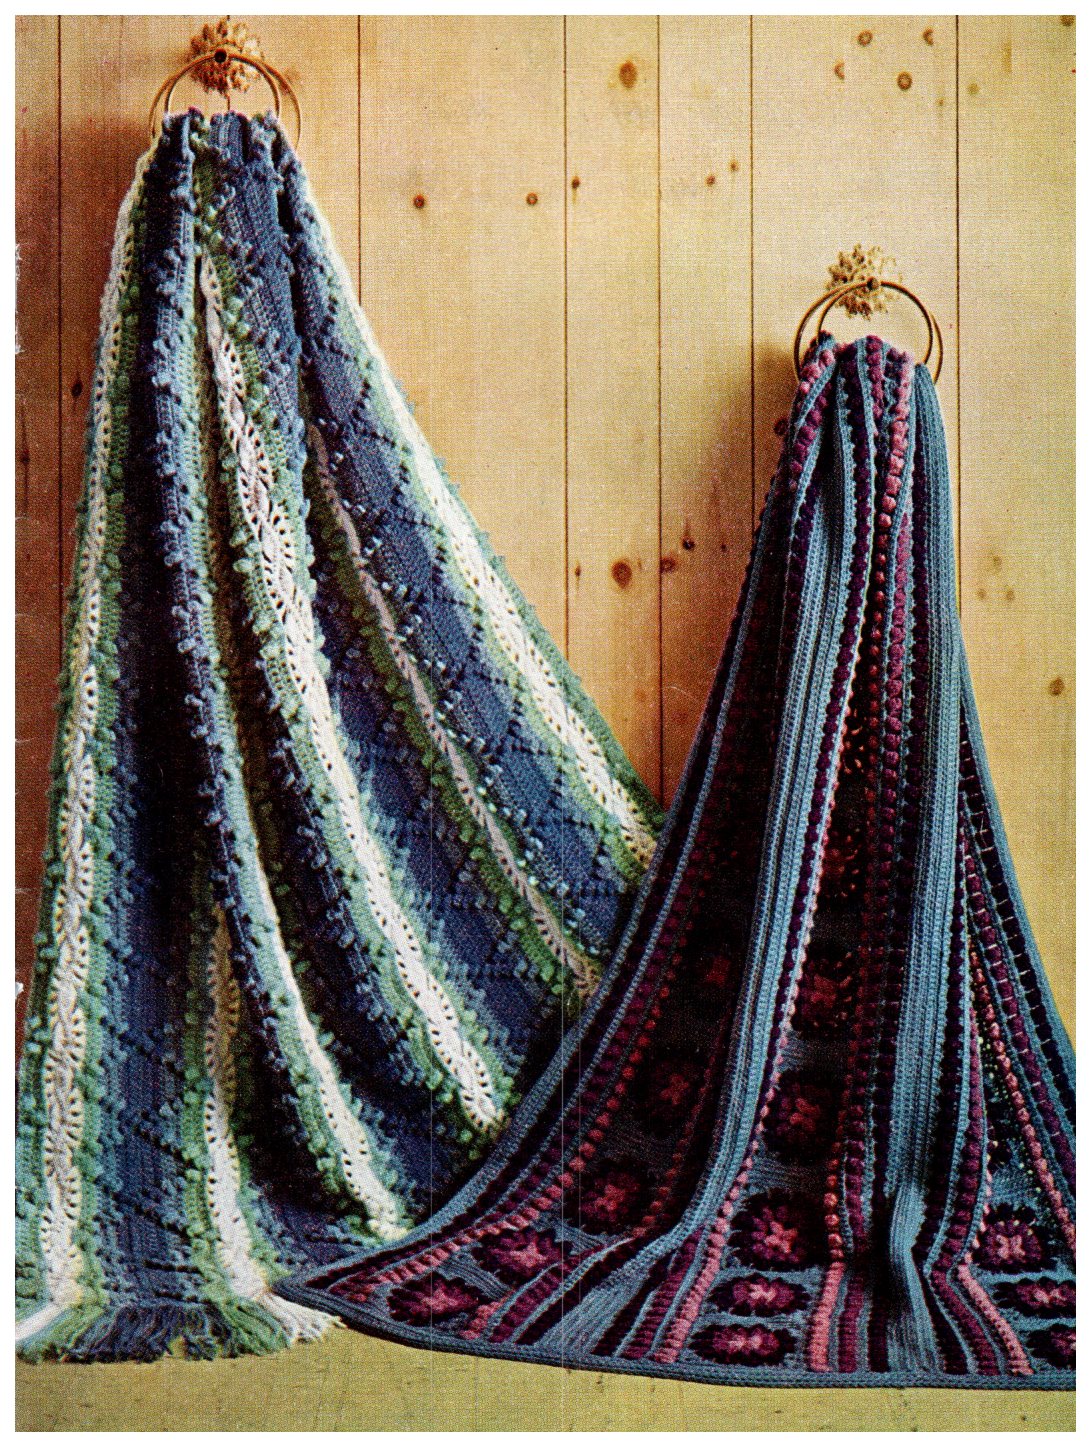 Afghans & Pillows Crochet and Knit Dawn Book No. 181 by American Thread Downloadable PDF - At Grandma's Table